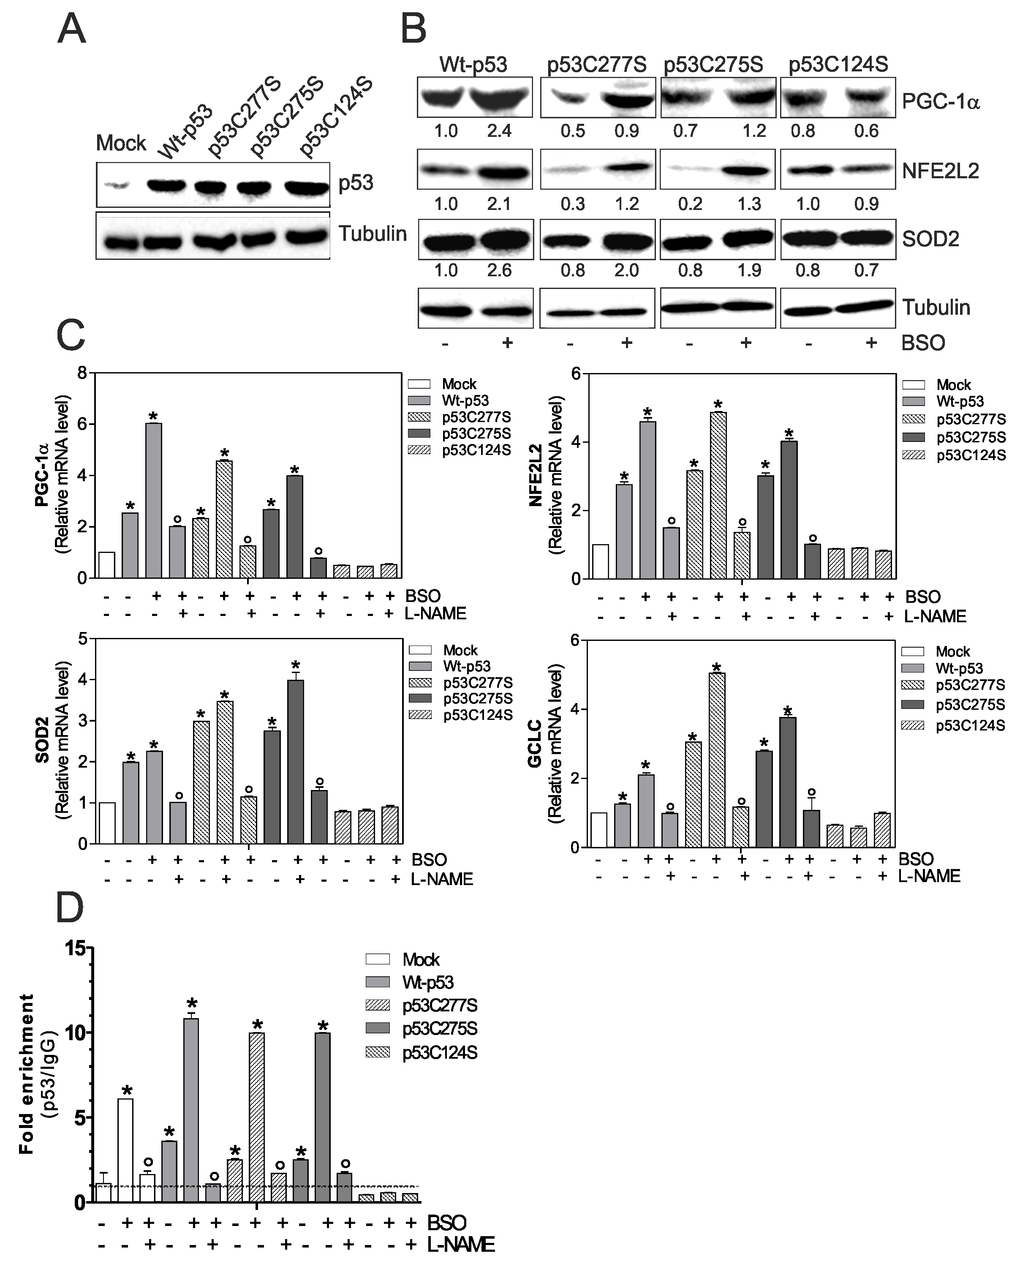 p53C124S mutant fails to induce NO/PGC-1α-mediated antioxidant pathway in C2C12 myoblasts. (A, B) C2C12 myoblasts were transfected with pcDNA3.1 vector containing cDNA for wild type p53 (Wt-p53), three single p53 mutants in DBD (p53C277S, p53C275S, p53C124S) or with empty vector (Mock). After 15 h from transfection, myoblasts were treated with 1 mM BSO for 24 h. Cells were lysed and 20 μg of proteins were loaded for Western blot analysis of p53, PGC-1α, NFE2L2 and SOD2. Tubulin was used as loading control. Numbers indicate the density of immunoreactive bands calculated using the Software Quantity one (Bio-Rad) and reported as the ratio of PGC-1α, NFE2L2 and SOD2/Tubulin. (C) L-NAME (100 μM) was added 1 h before BSO treatment (15 h) and maintained throughout the experiment. Total RNA was isolated and relative mRNA levels of PGC-1α, NFE2L2, SOD2 and GCLC were analyzed by RT-qPCR. Data are expressed as means ± S.D. (n=4; *pvs Mock; °pvs BSO-treated cells). (D) ChIP assay was carried out on cross-linked nuclei from Mock, Wt-p53, p53C277S, p53C275S and p53C124S cells using p53 antibody followed by qPCR analysis of p53RE. Dashed line indicates the value of IgG control. Data are expressed as means ± S.D. (n=3; *pvs Mock; °pvs BSO-treated cells). All the immunoblots reported are from one experiment representative of four that gave similar results.